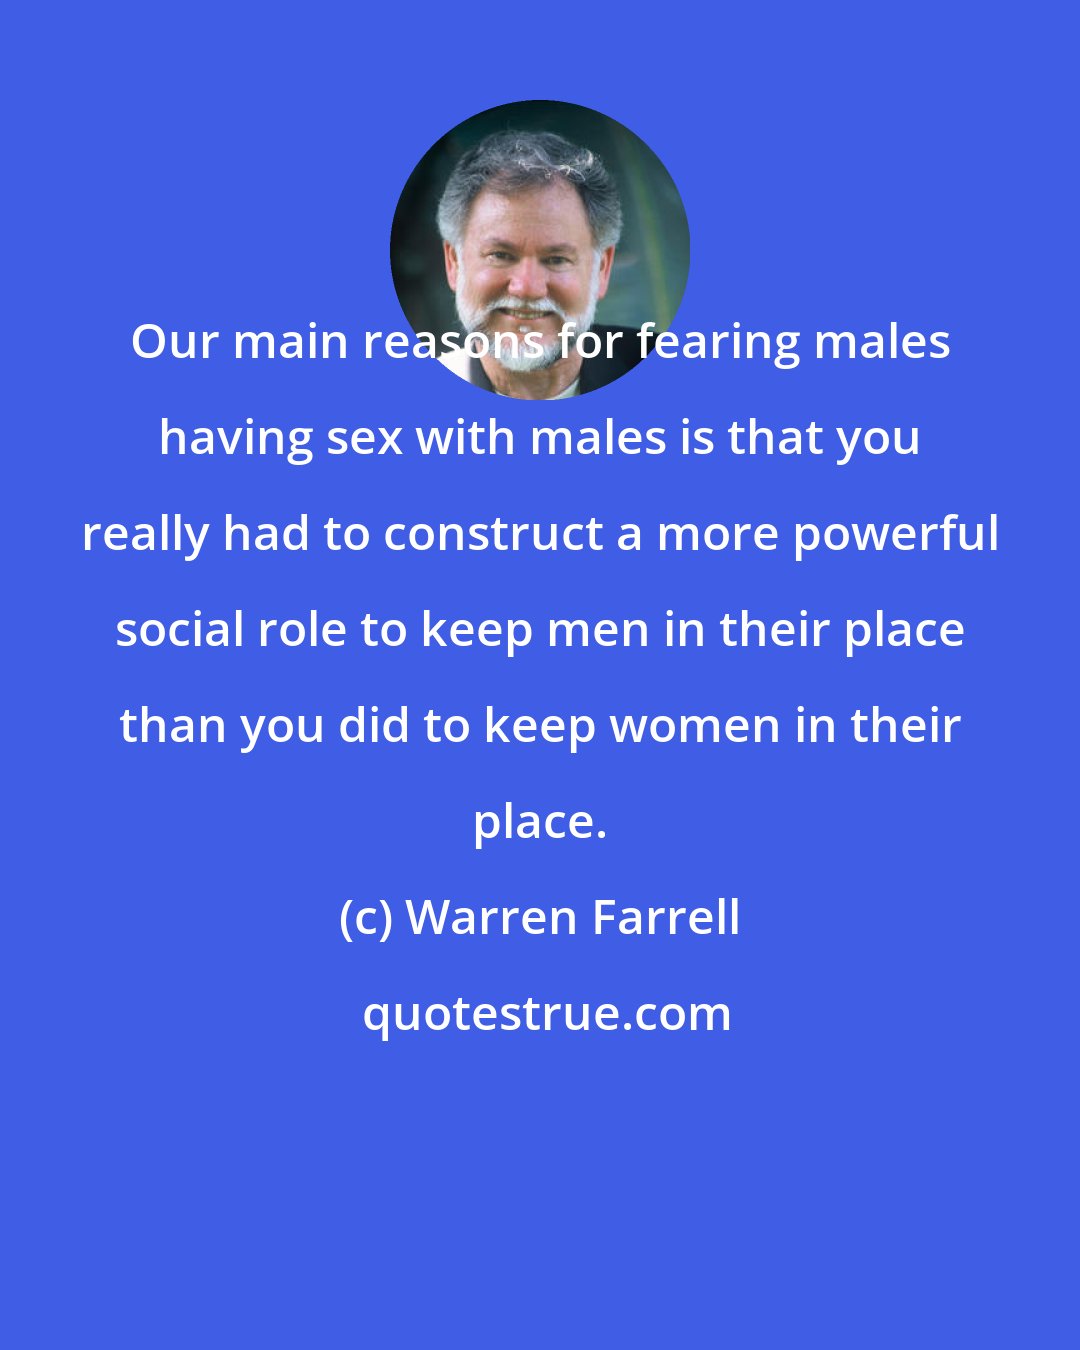 Warren Farrell: Our main reasons for fearing males having sex with males is that you really had to construct a more powerful social role to keep men in their place than you did to keep women in their place.